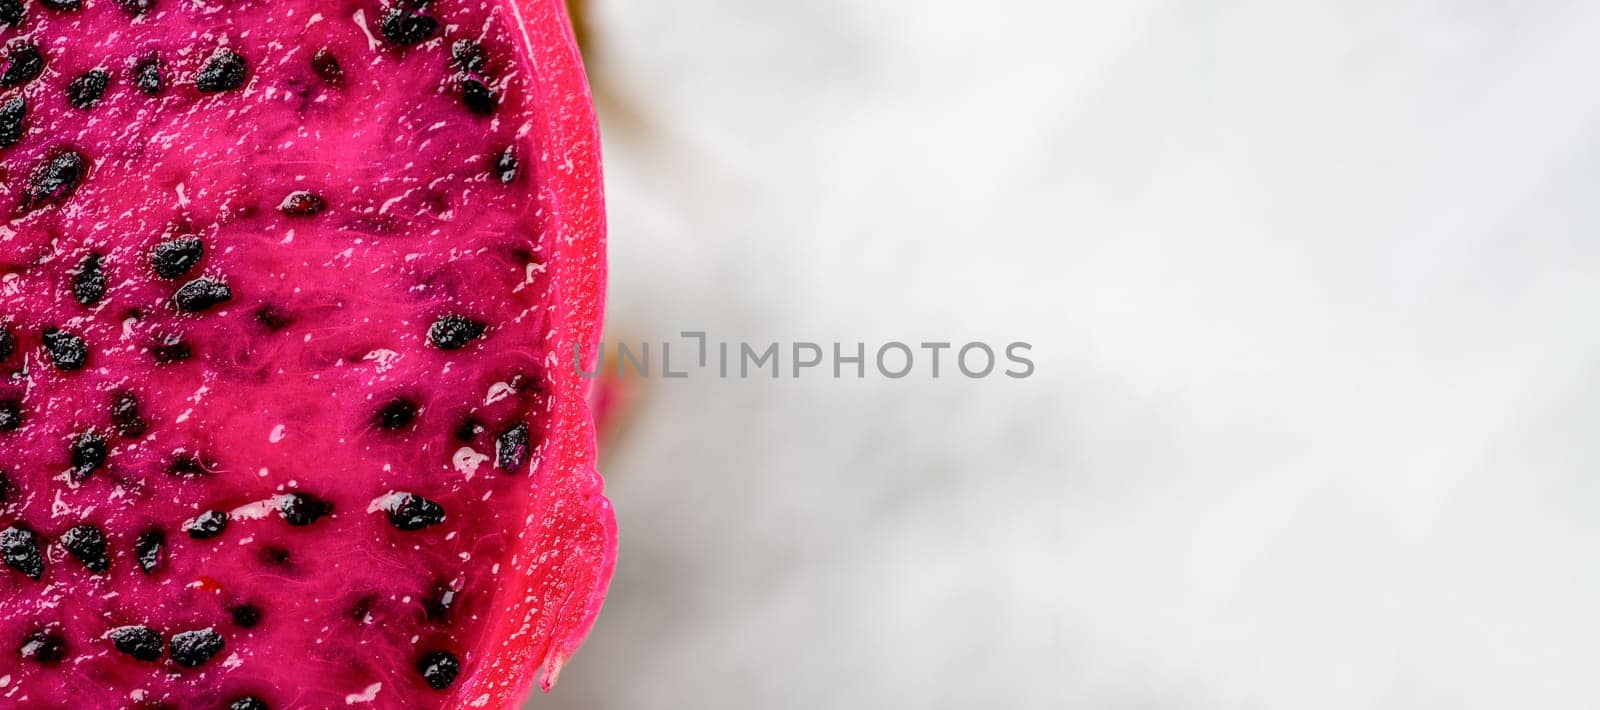 Ripe red dragon fruit on an isolated white background